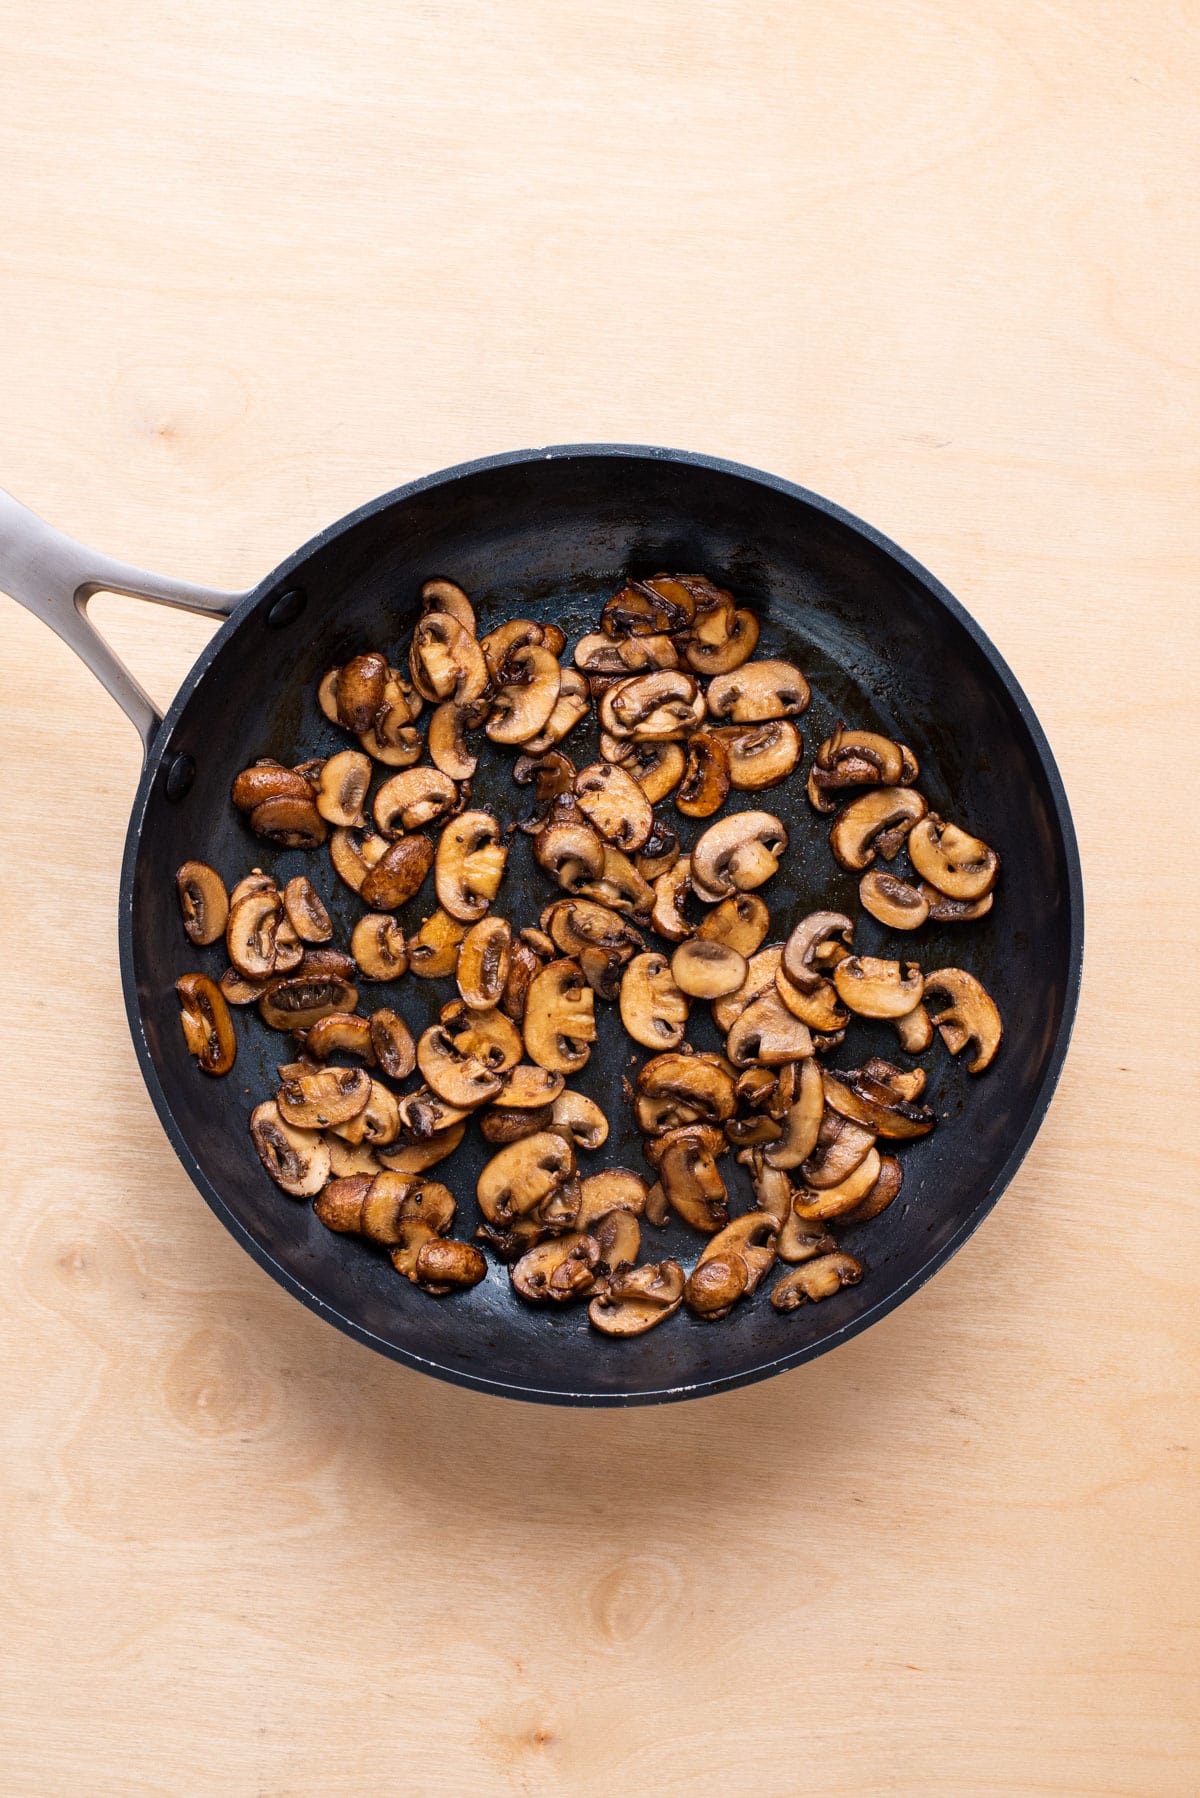 Sauteed balsamic mushrooms in a skillet.